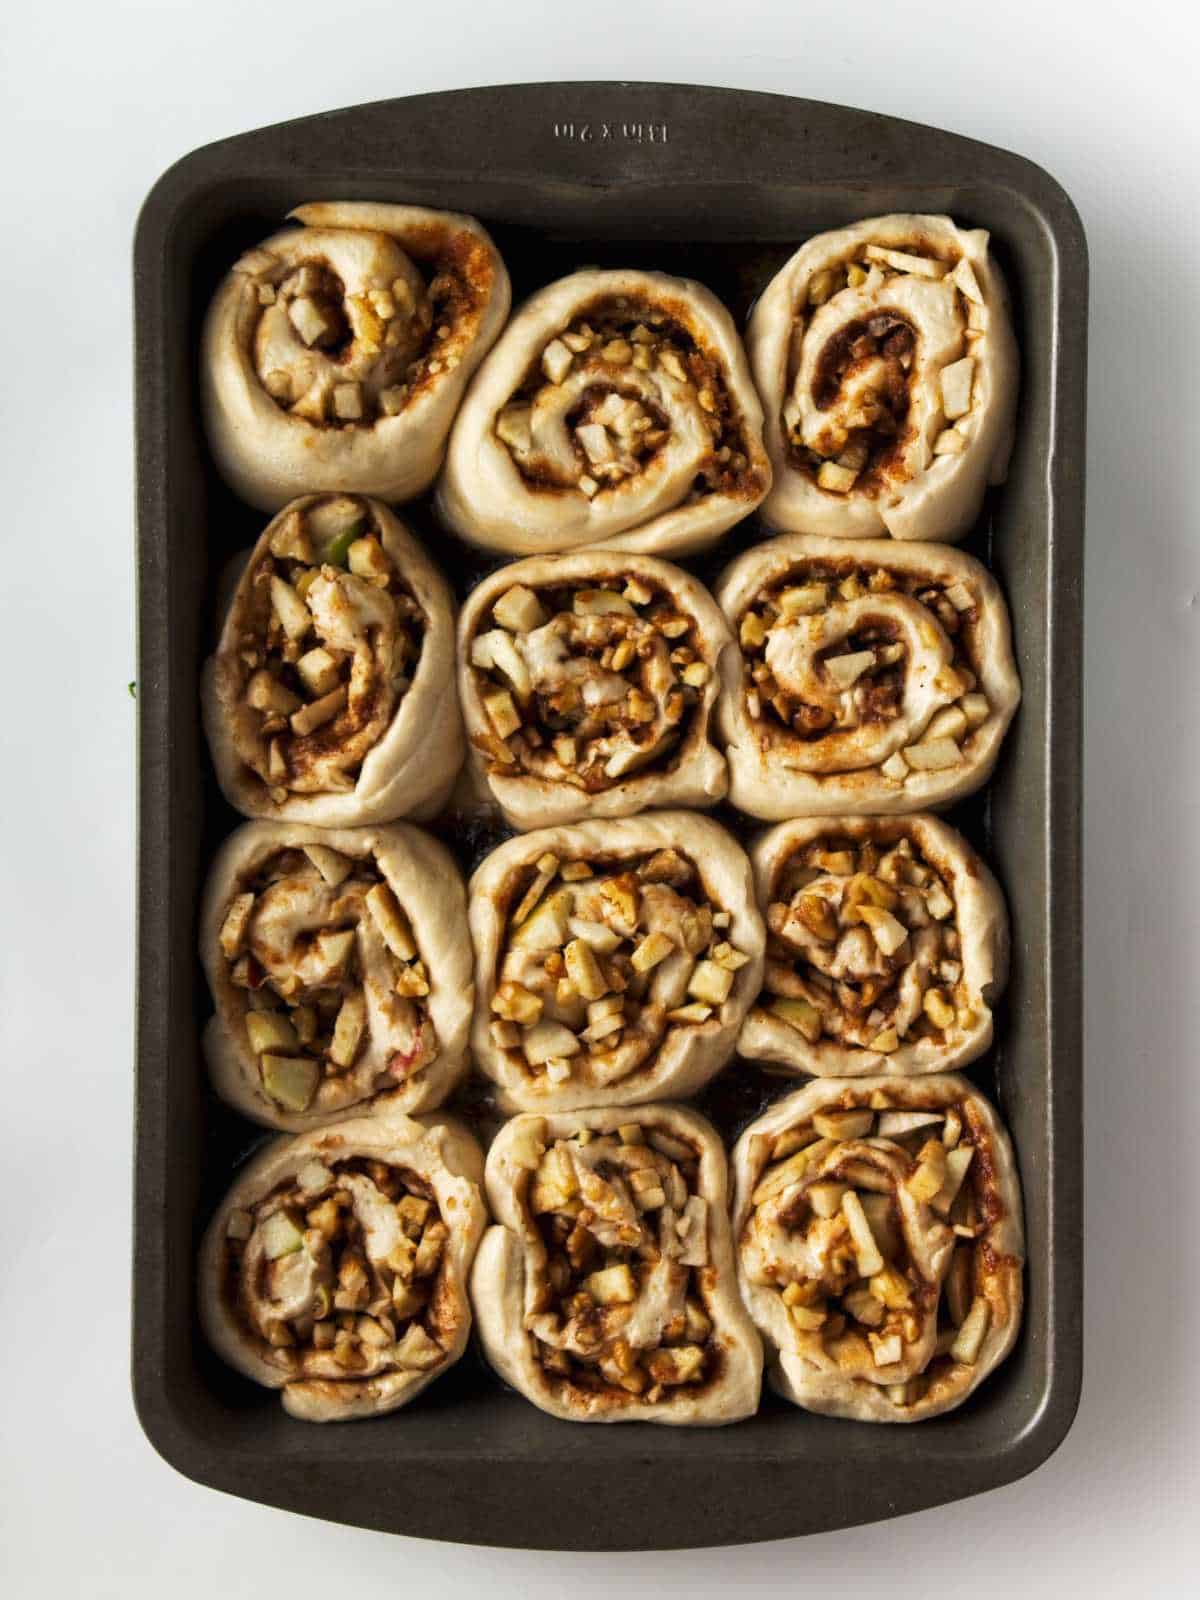 sliced dough pinwheels placed in a baking pan to rise before baking.